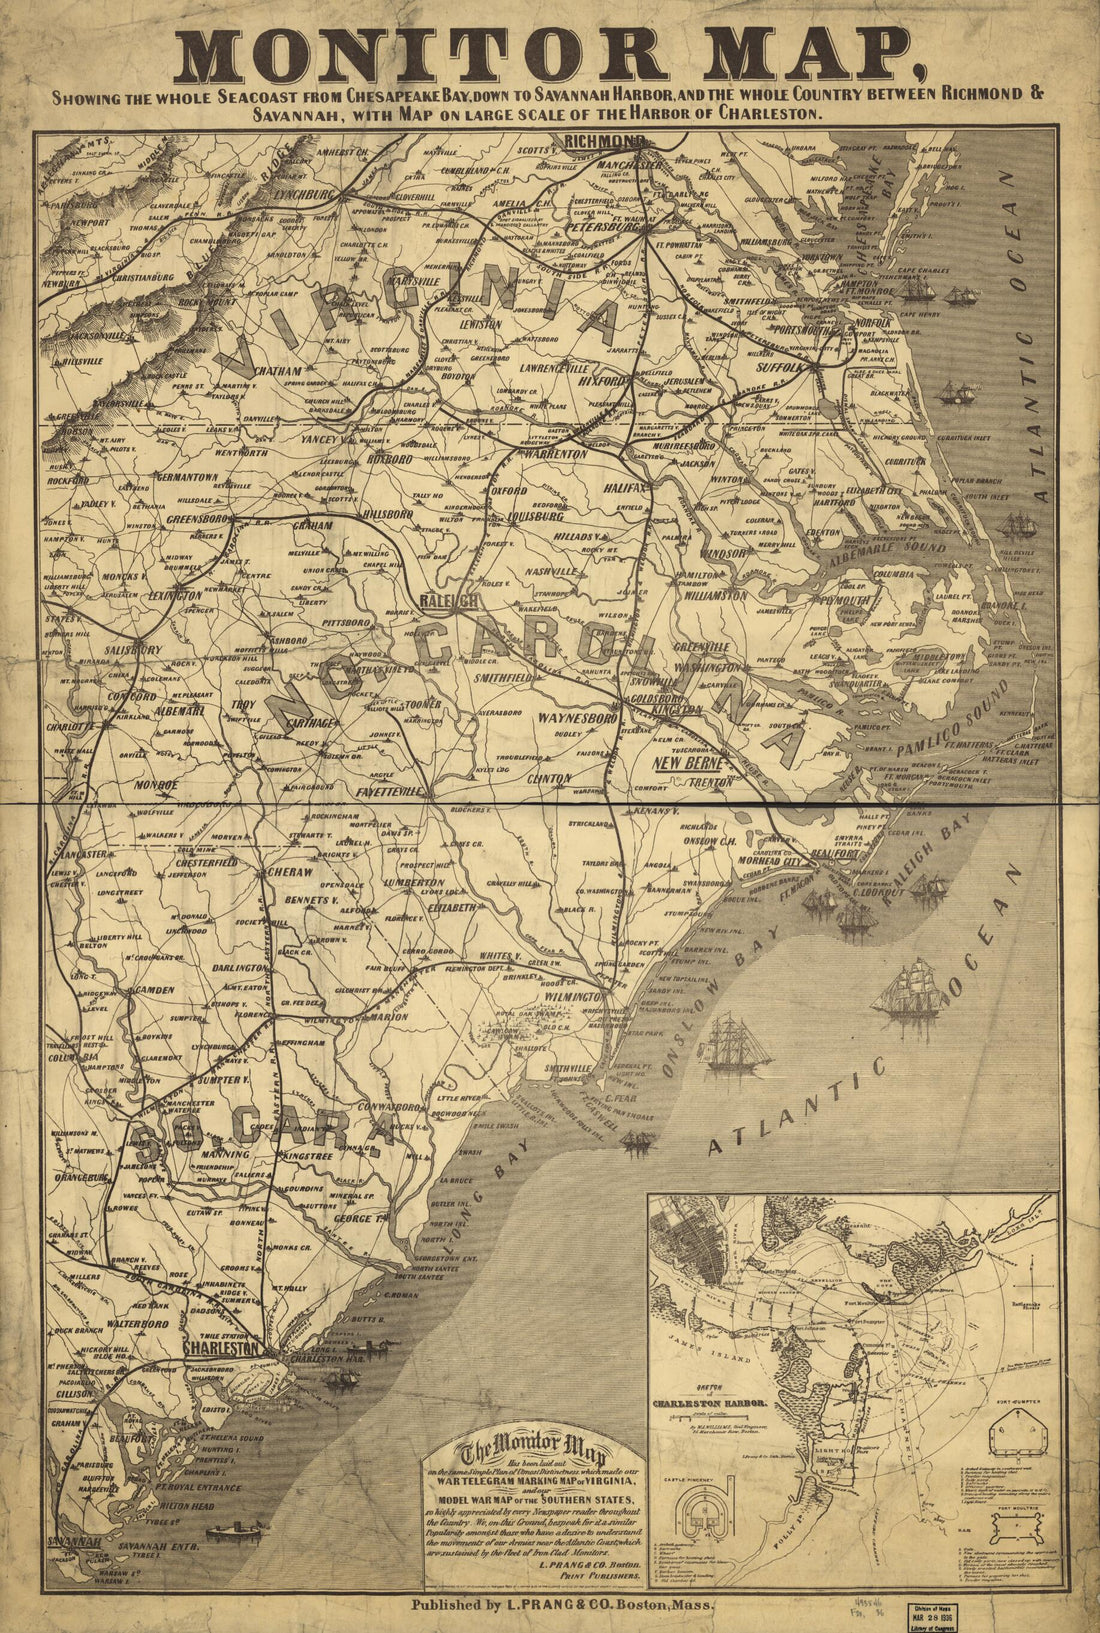 This old map of Monitor Map, Showing the Whole Seacoast from Chesapeake Bay, Down to Savannah Harbor, and the Whole Country Between Richmond &amp; Savannah, With Map On Large Scale of the Harbor of Charleston from 1863 was created by  Louis Prang and Company